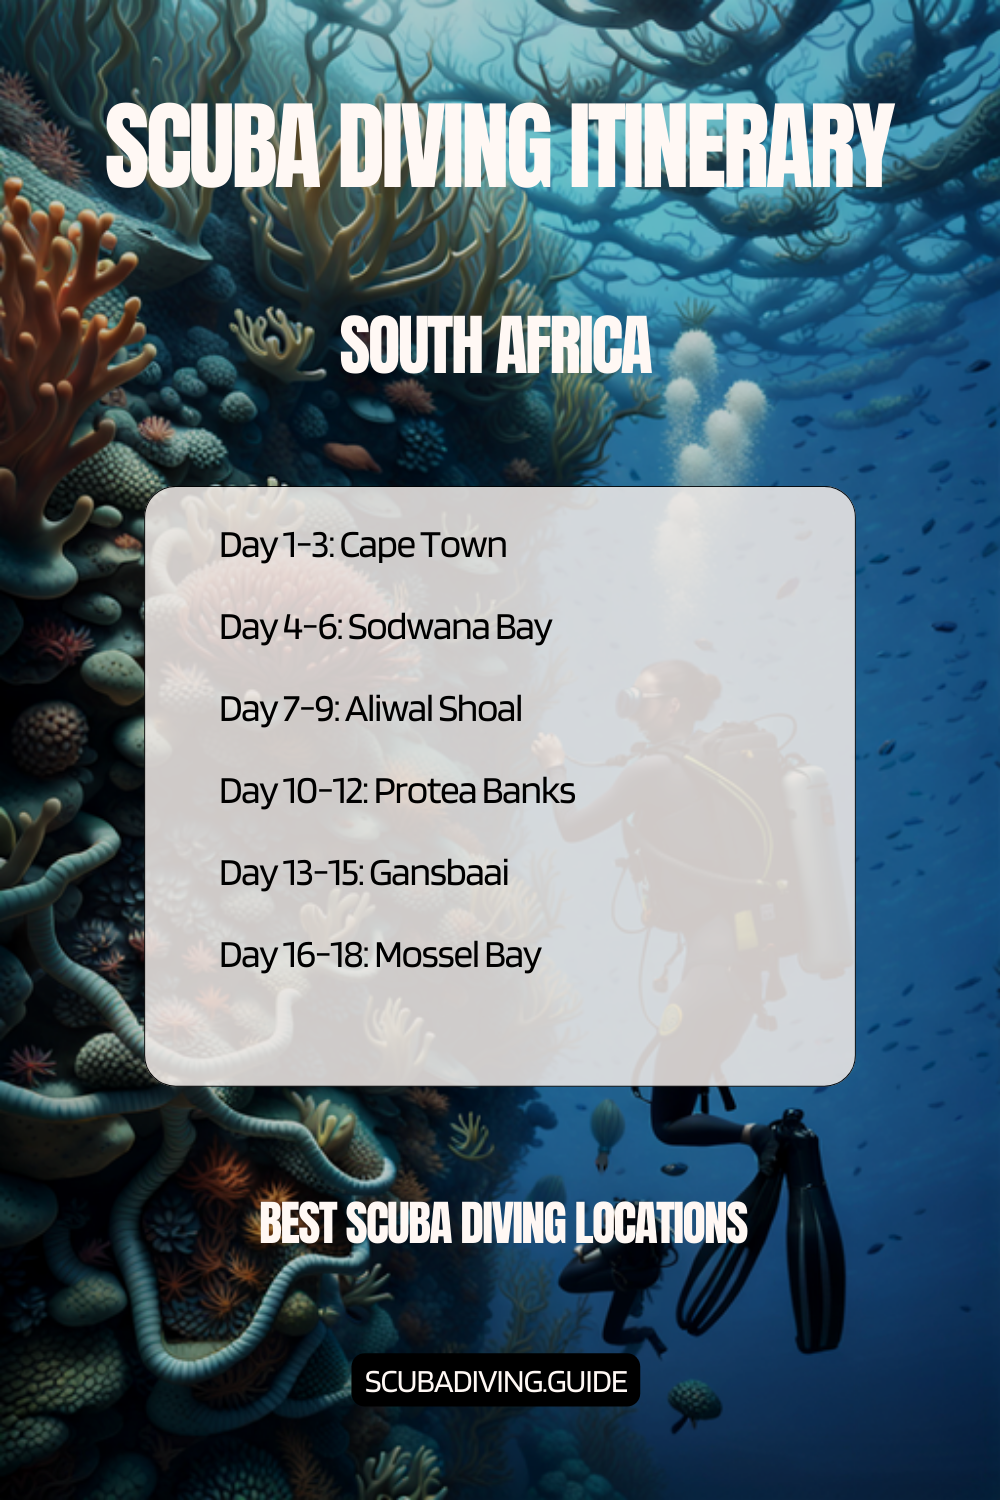 South Africa Recommended Scuba Diving Itinerary